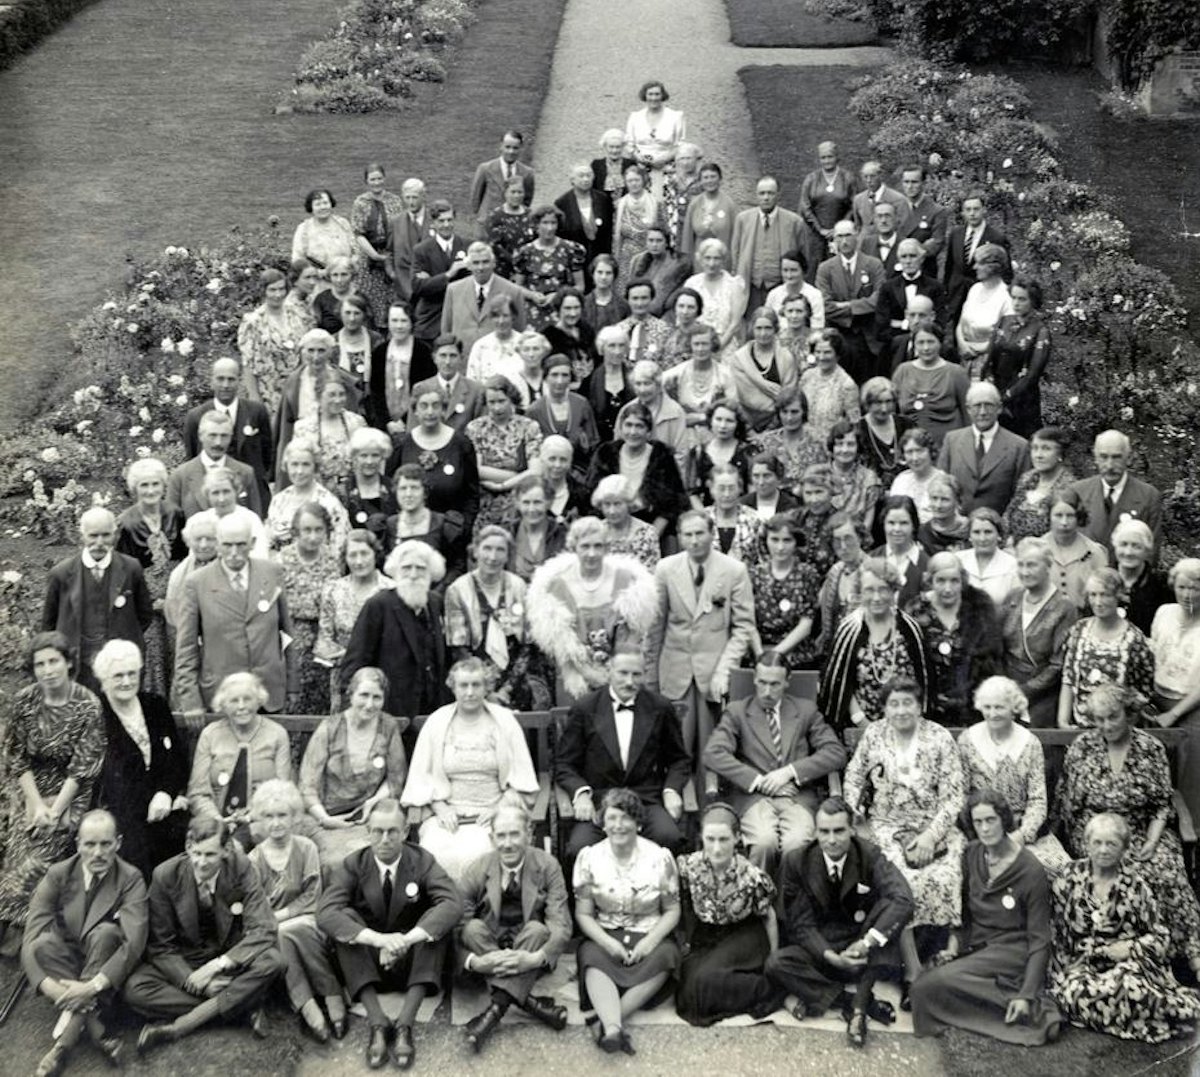 St. Barbe is sitting in the middle of the second row for this portrait of the participants in the first summer school of Men of the Trees in 1938. (Credit: University of Saskatchewan Library, University Archives & Special Collections, Richard St. Barbe Baker Fonds)